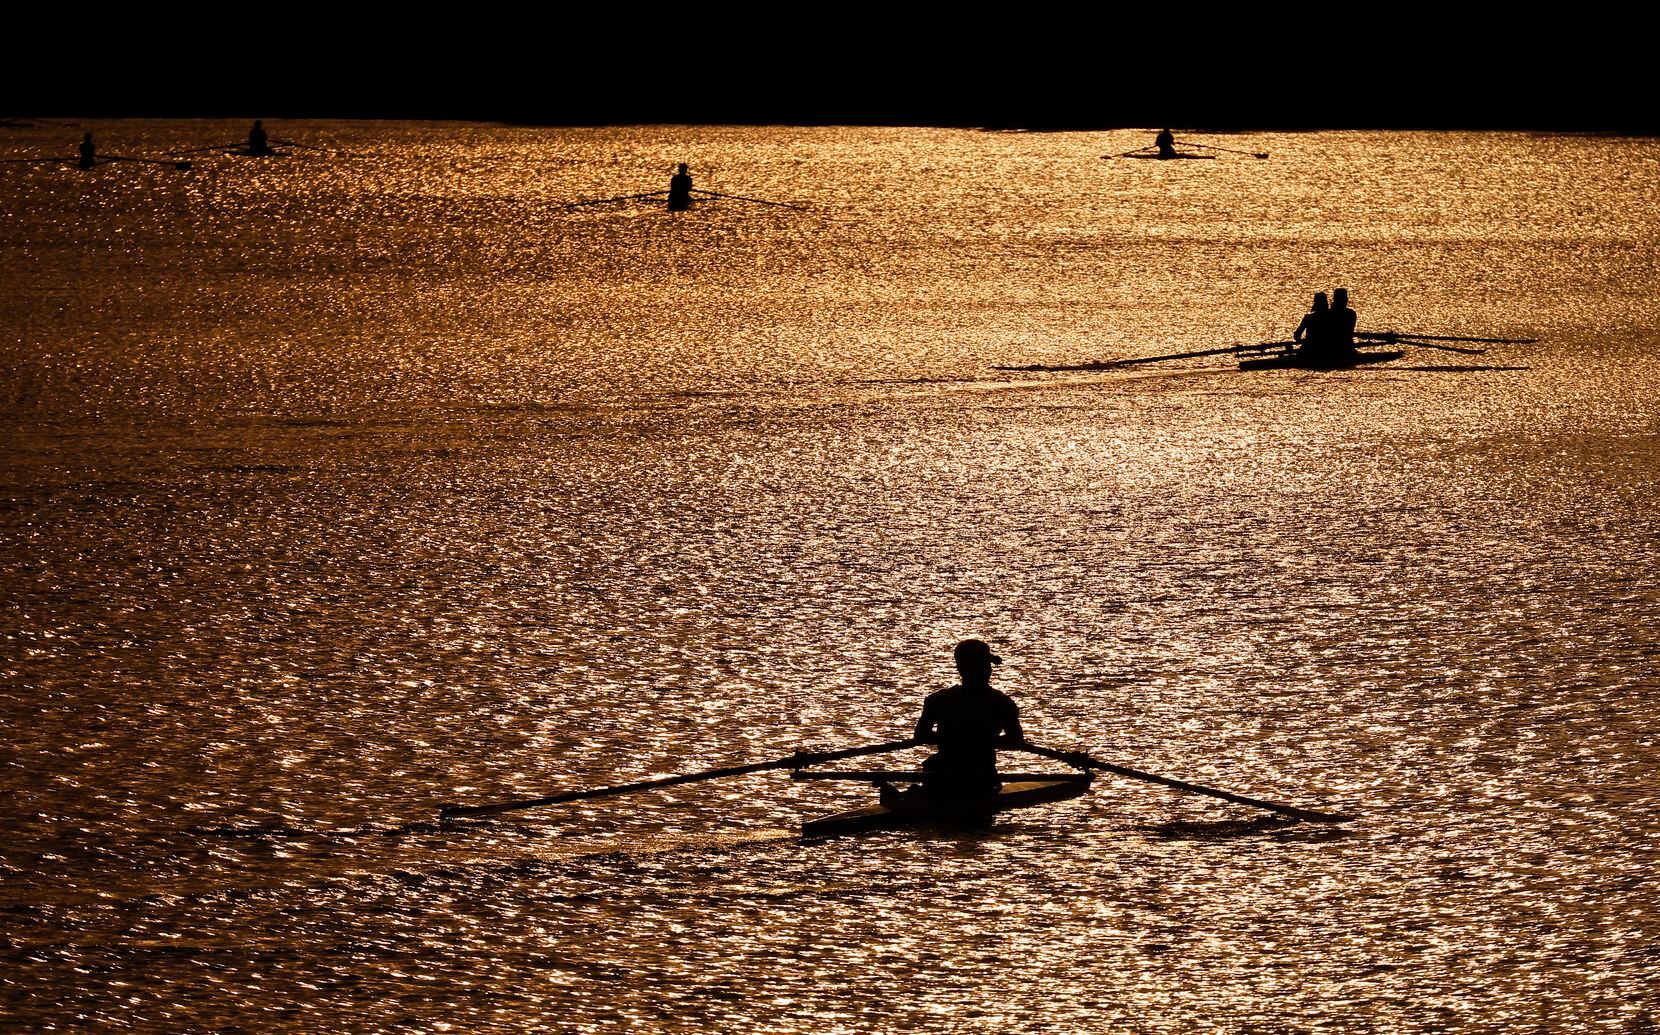 Members of the Dallas Rowing Club and its Juniors program glided across the water during a...